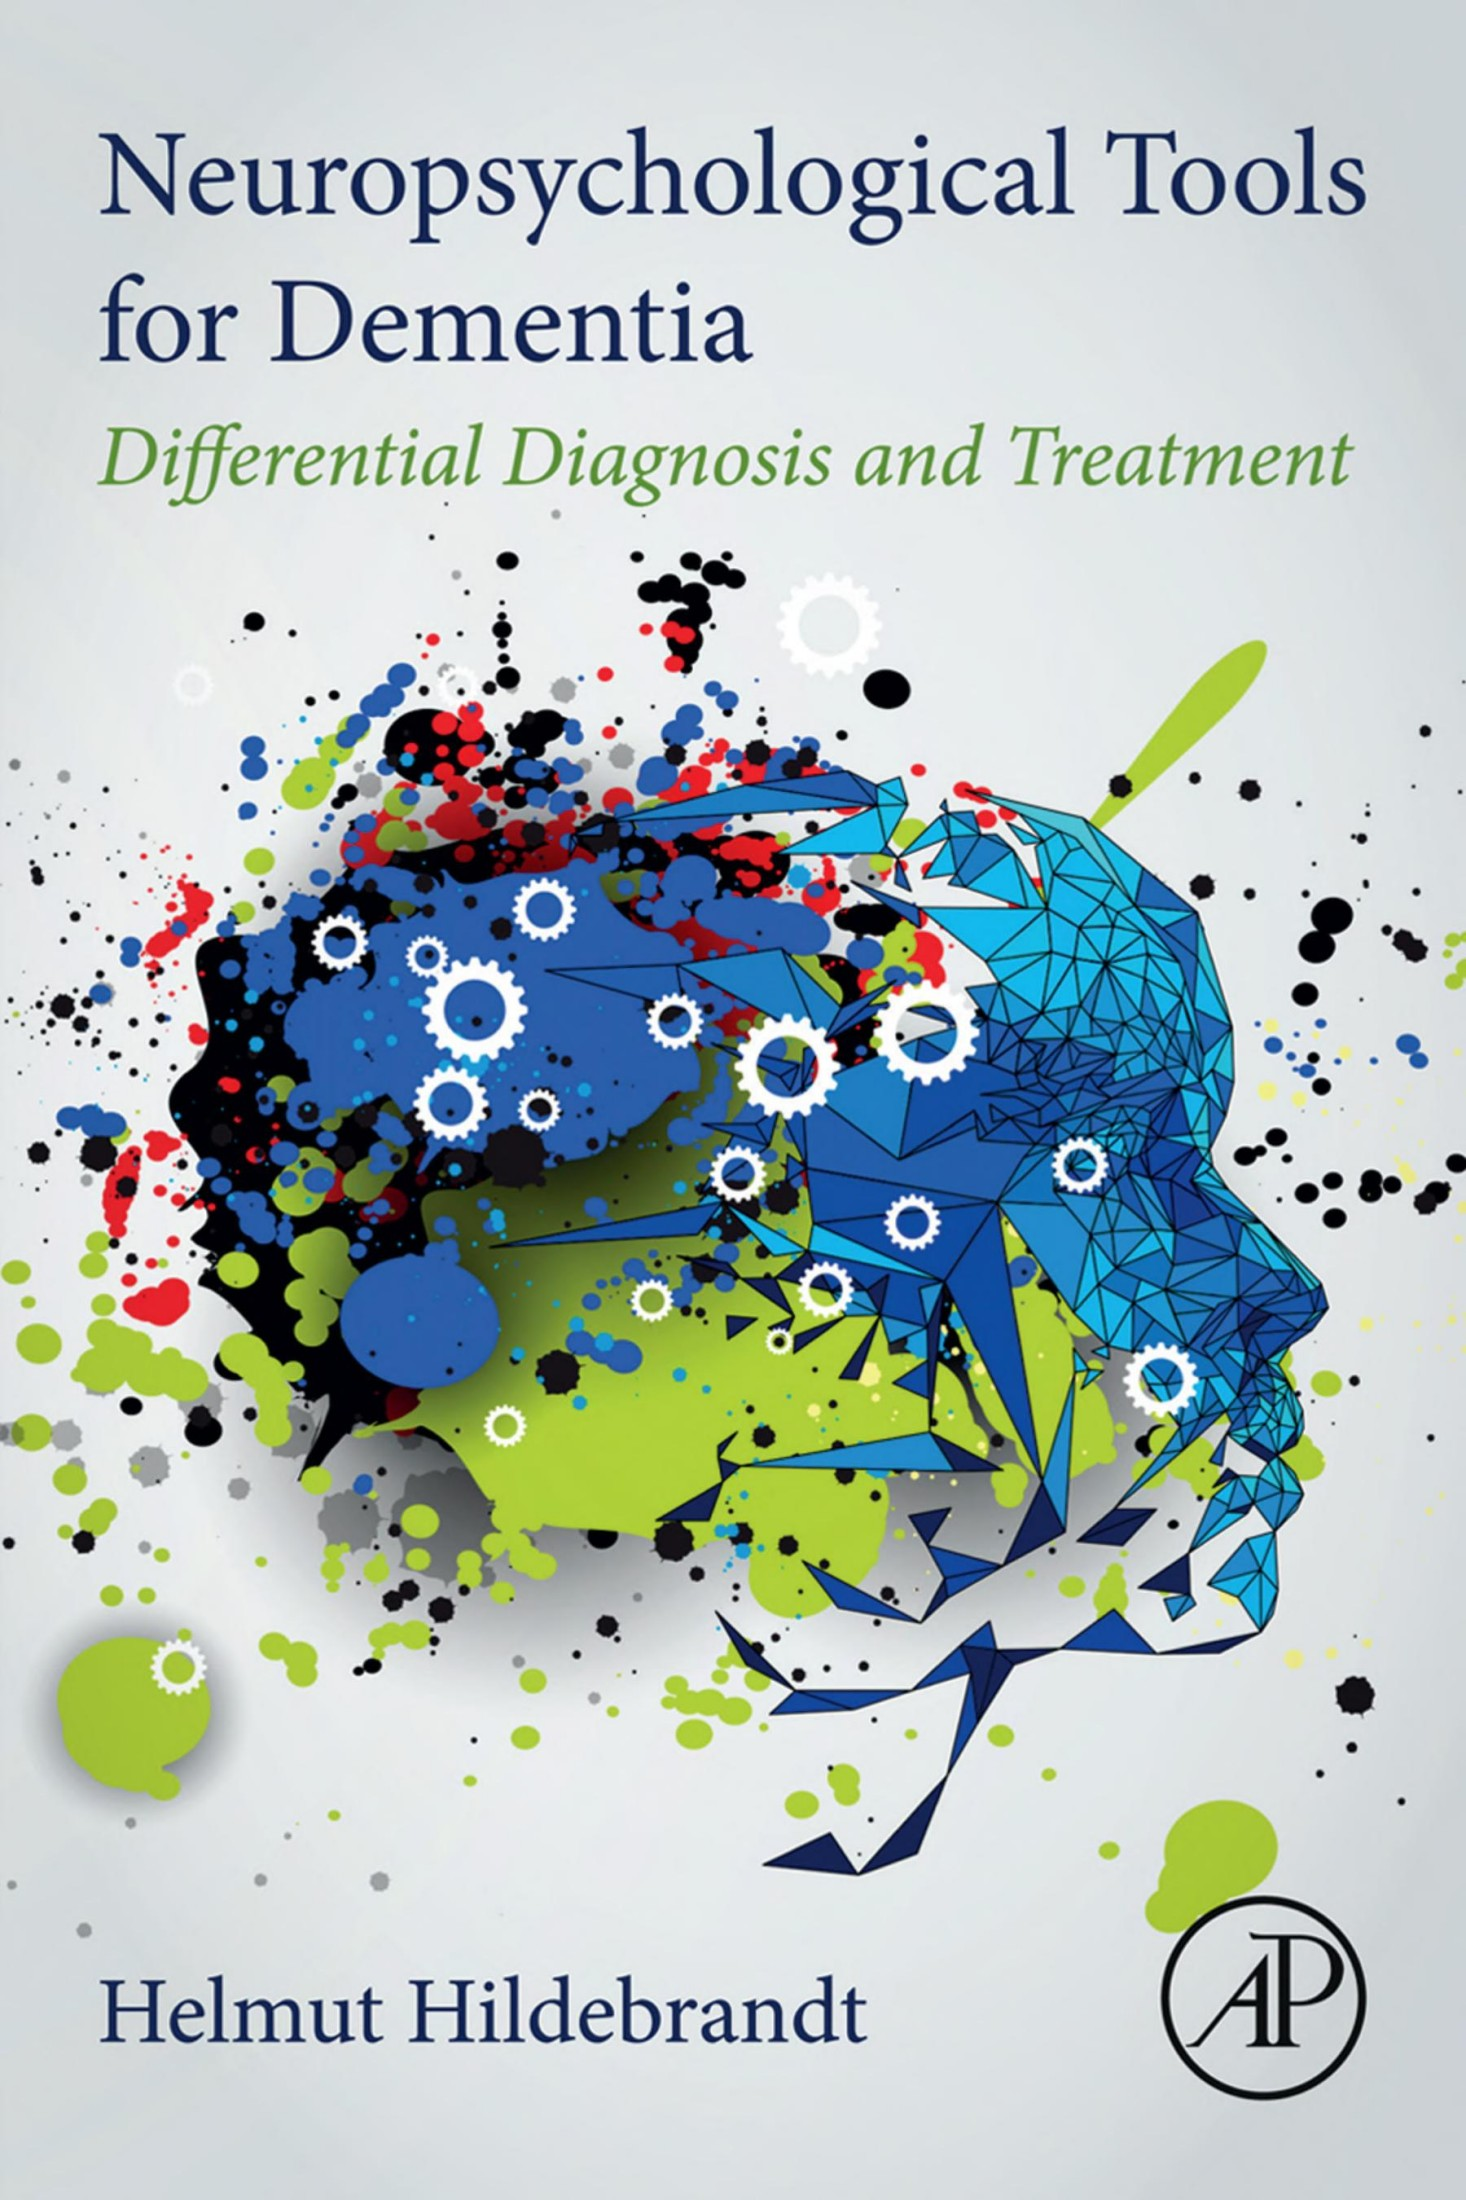 Neuropsychological tools for dementia : differential diagnosis and treatment